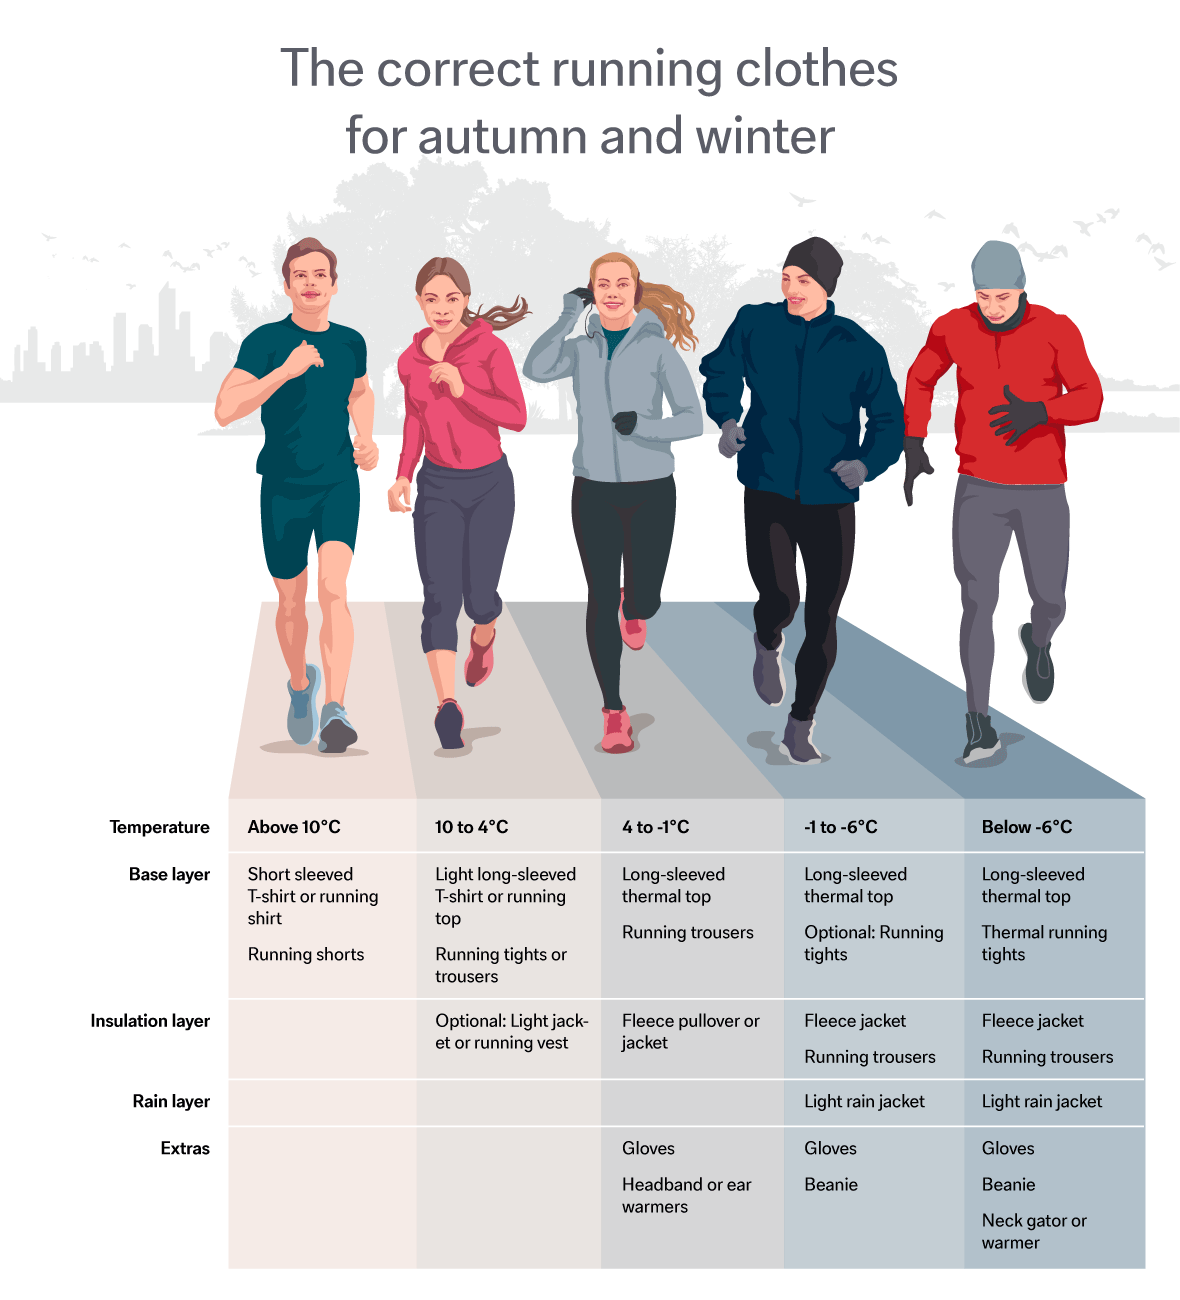 A graphic explaining the layered clothing: The correct running clothes for different temperatures.